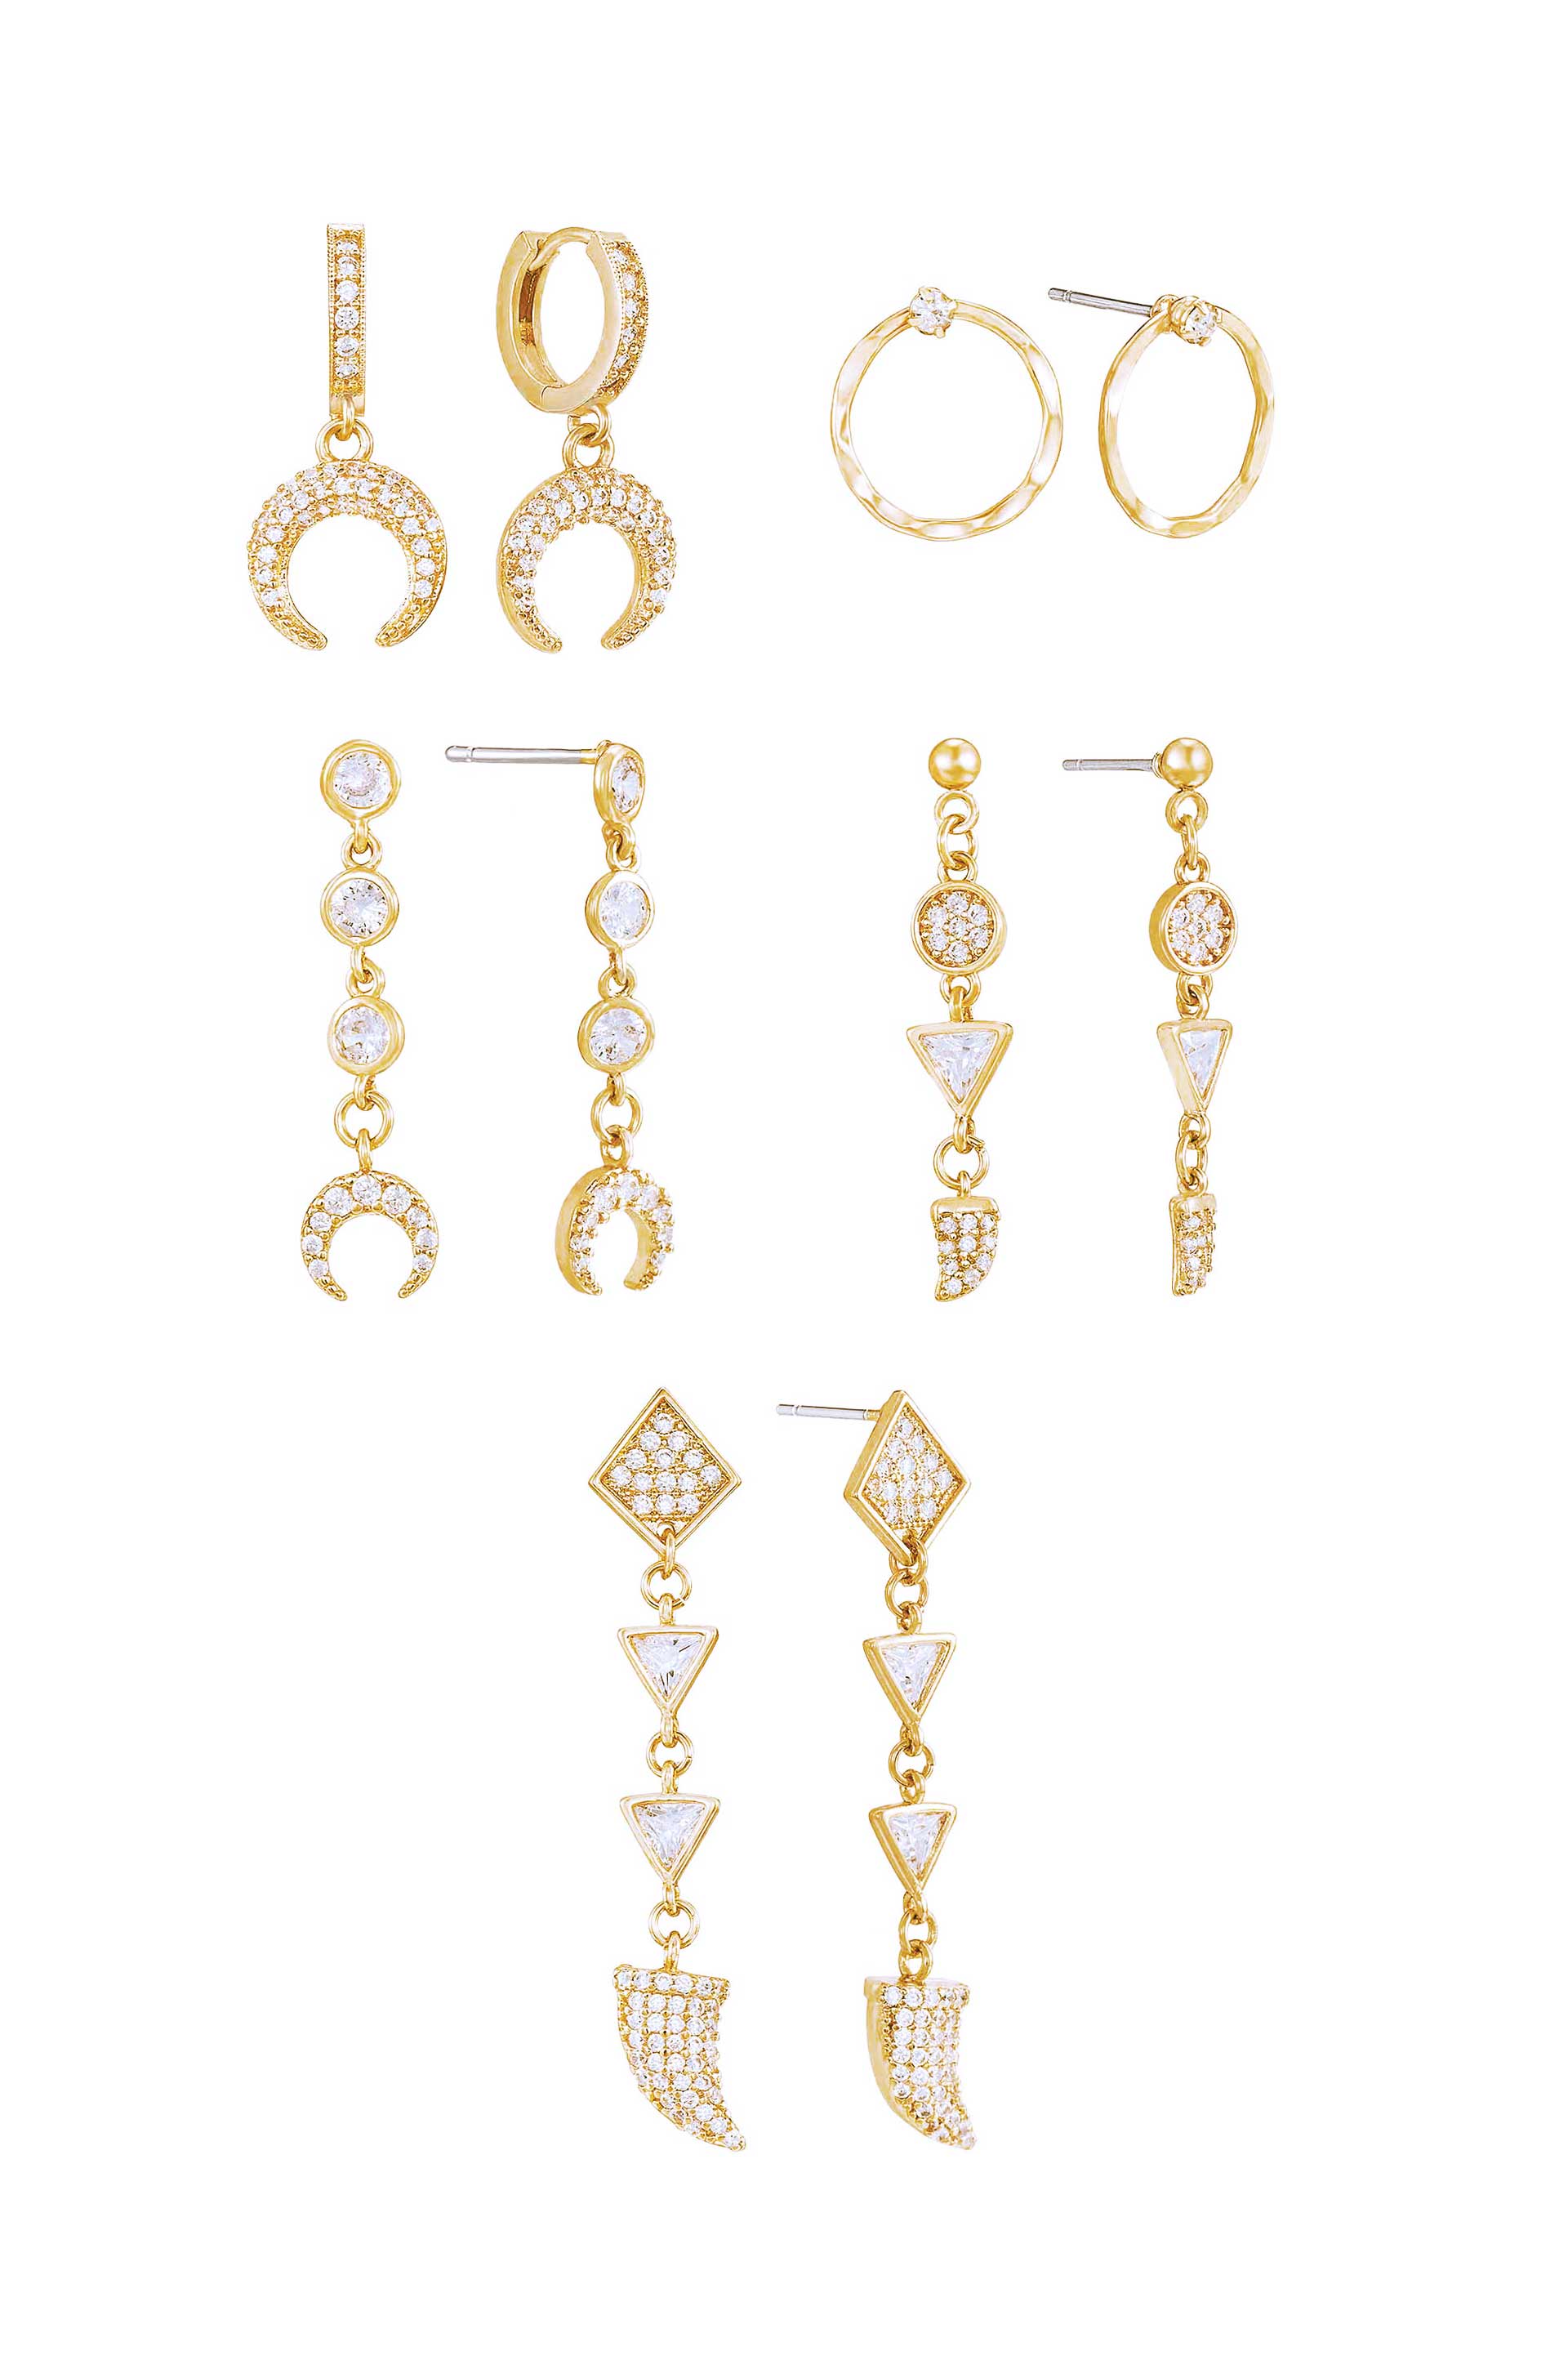 The Weekday Set 18k Gold Plated and Crystal Earring Set of 5